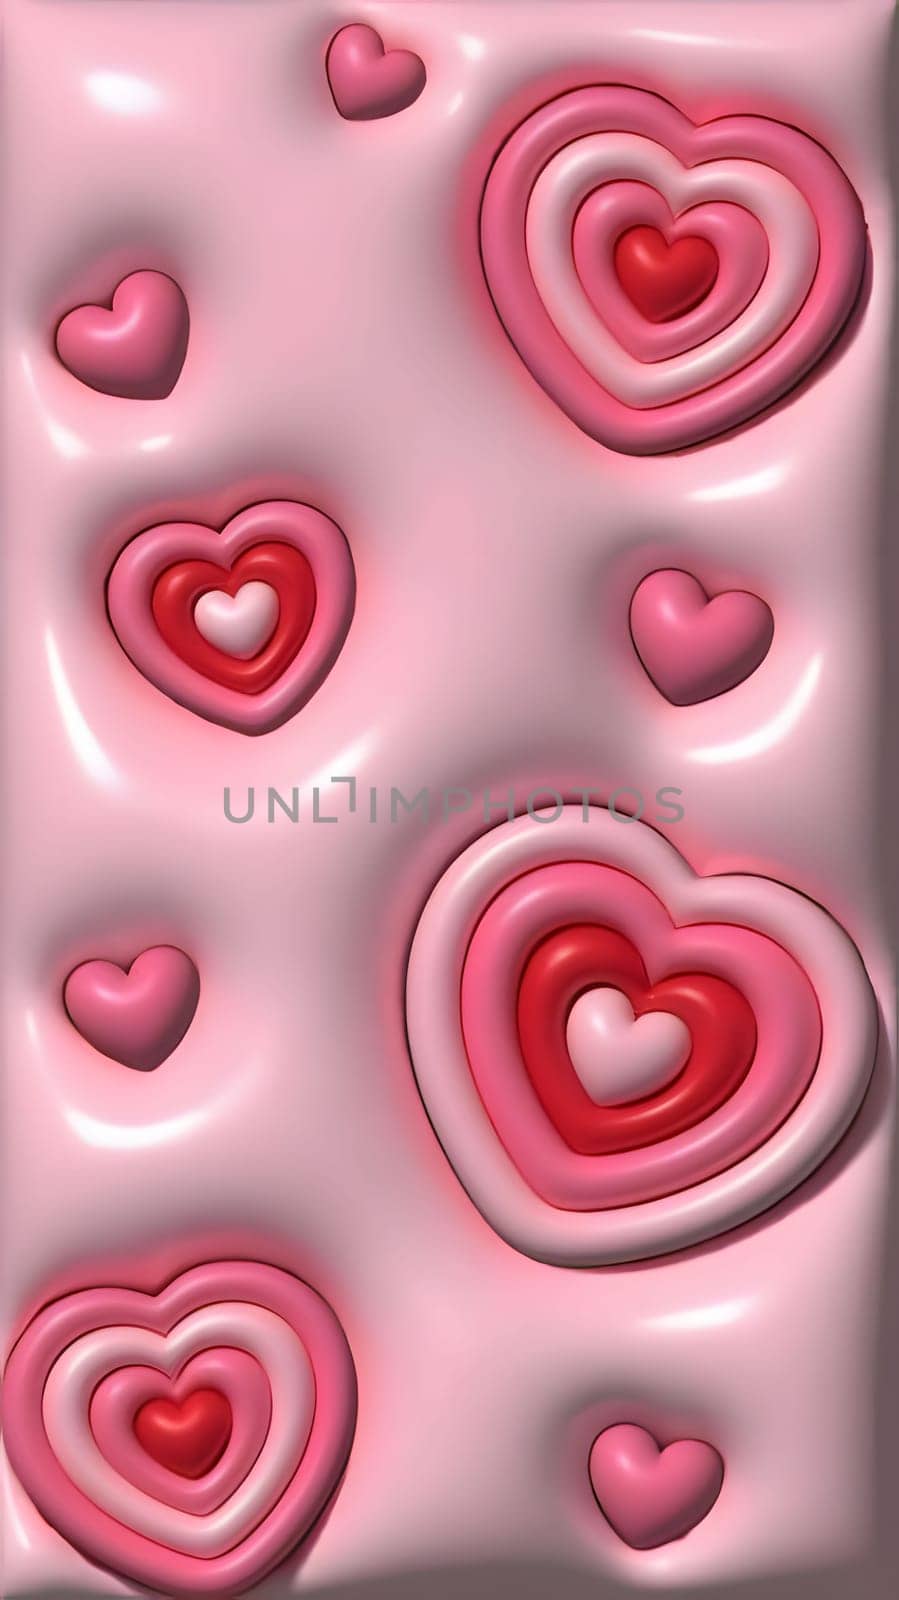 Pink hearts with contour levels on a pink 3D background. Heart as a symbol of affection and love. by ThemesS